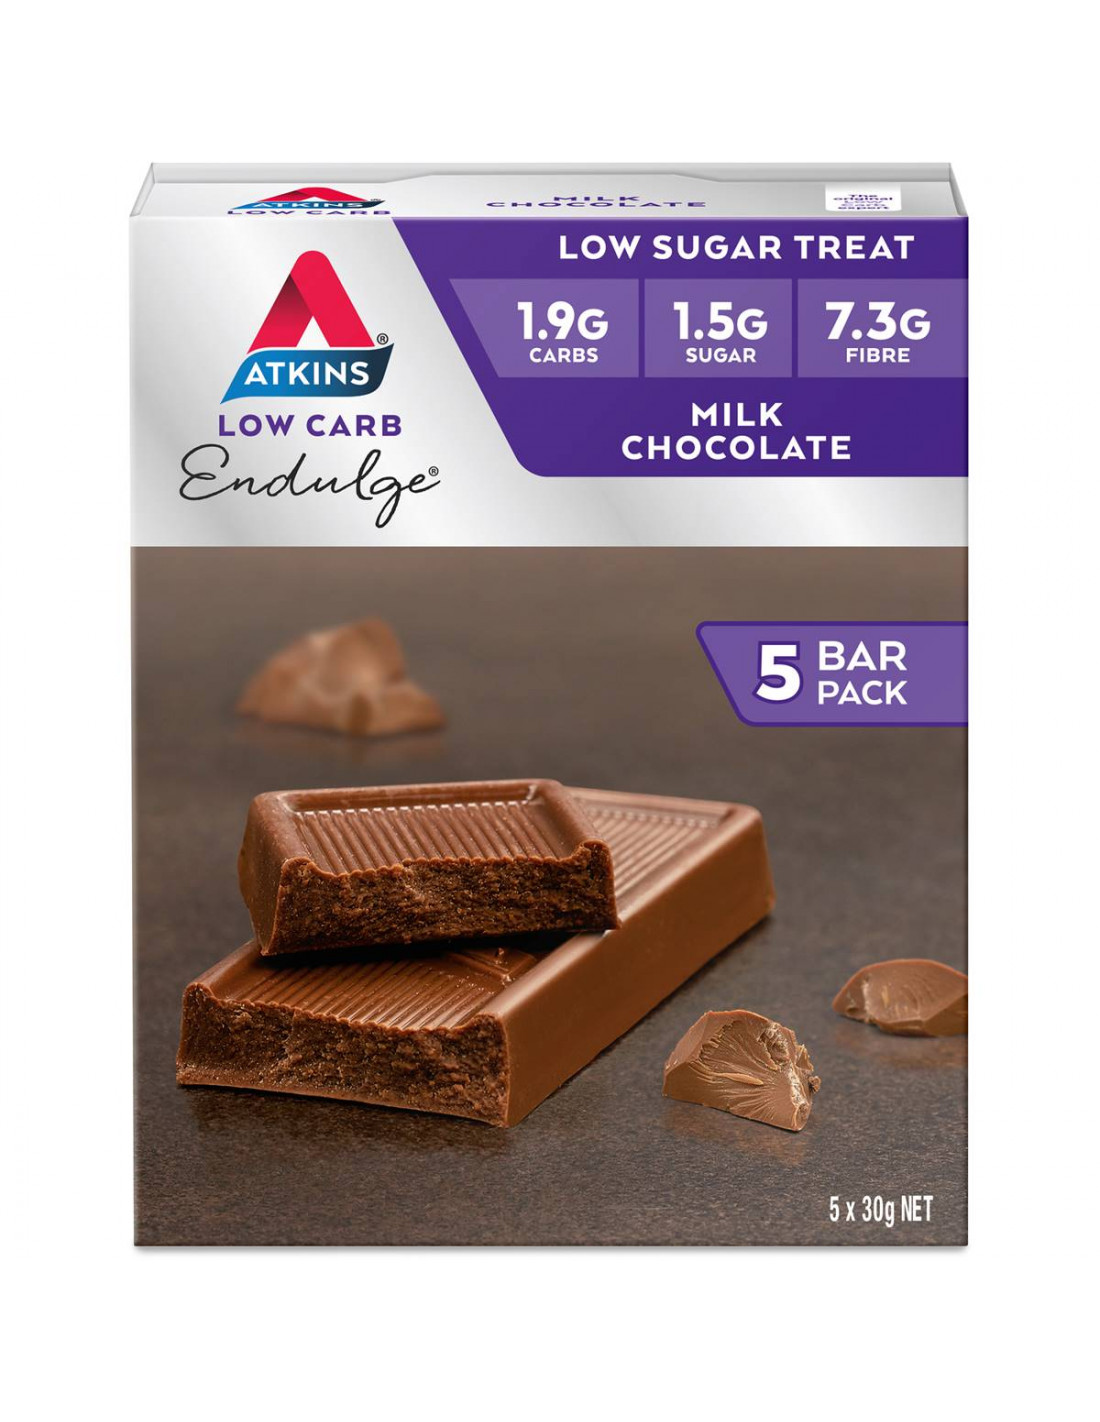 Atkins Endulge Milk Chocolate 5 pack | Ally's Basket - Direct from ...